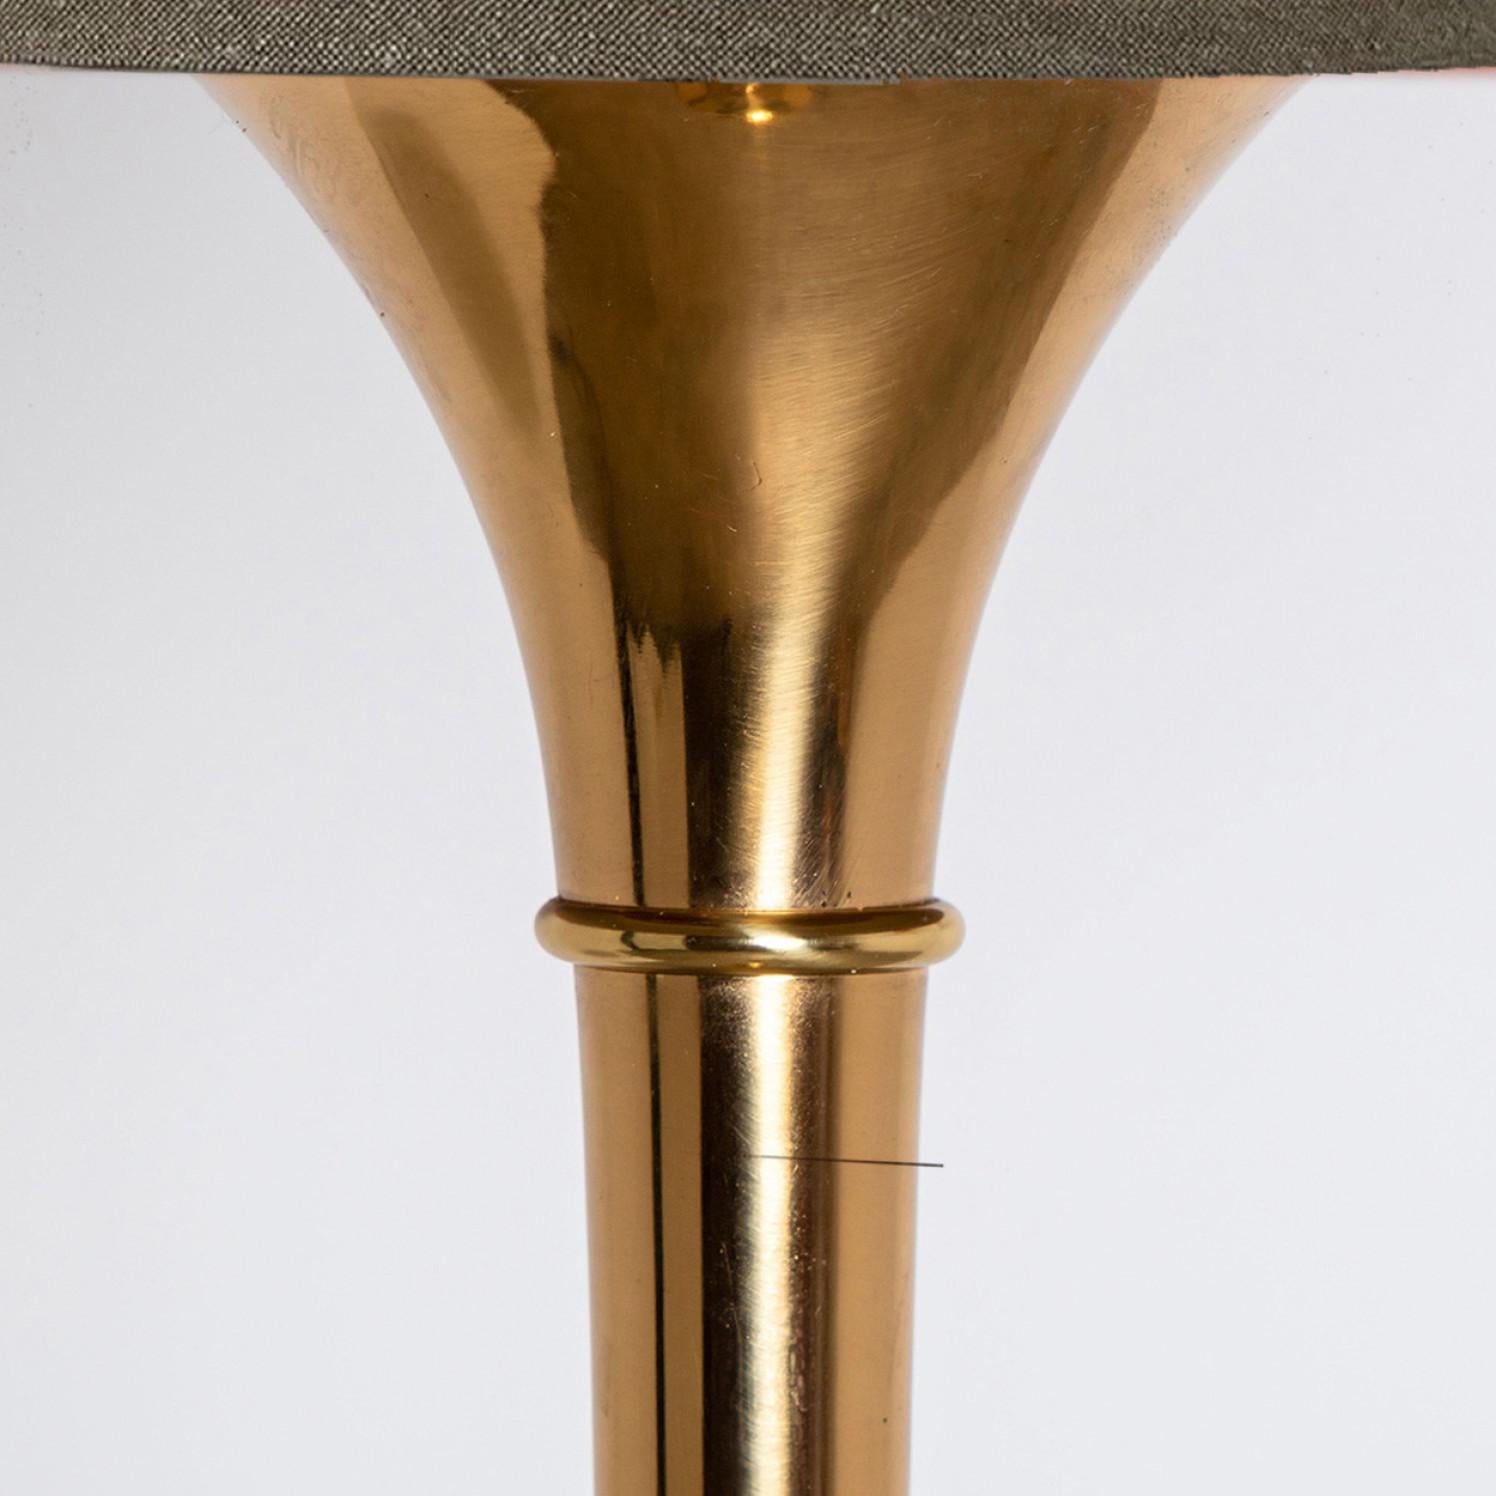 Pair of Table Lamps Gold Brass and Bamboo by Ingo Maurer, Europe, Germany, 1968 For Sale 3